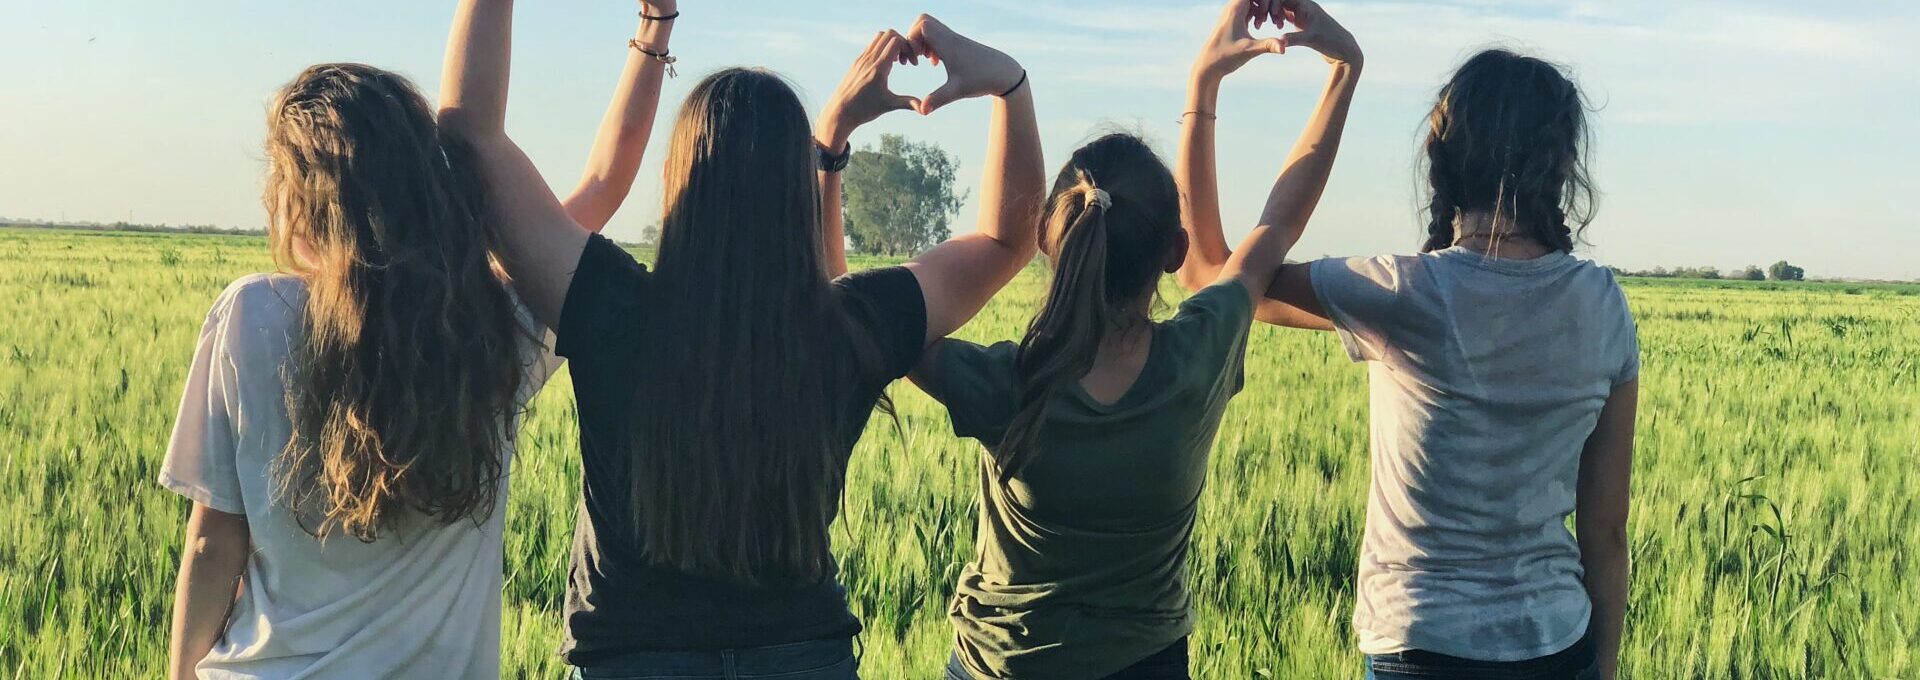 Girls in a field making heart shapes with their hands